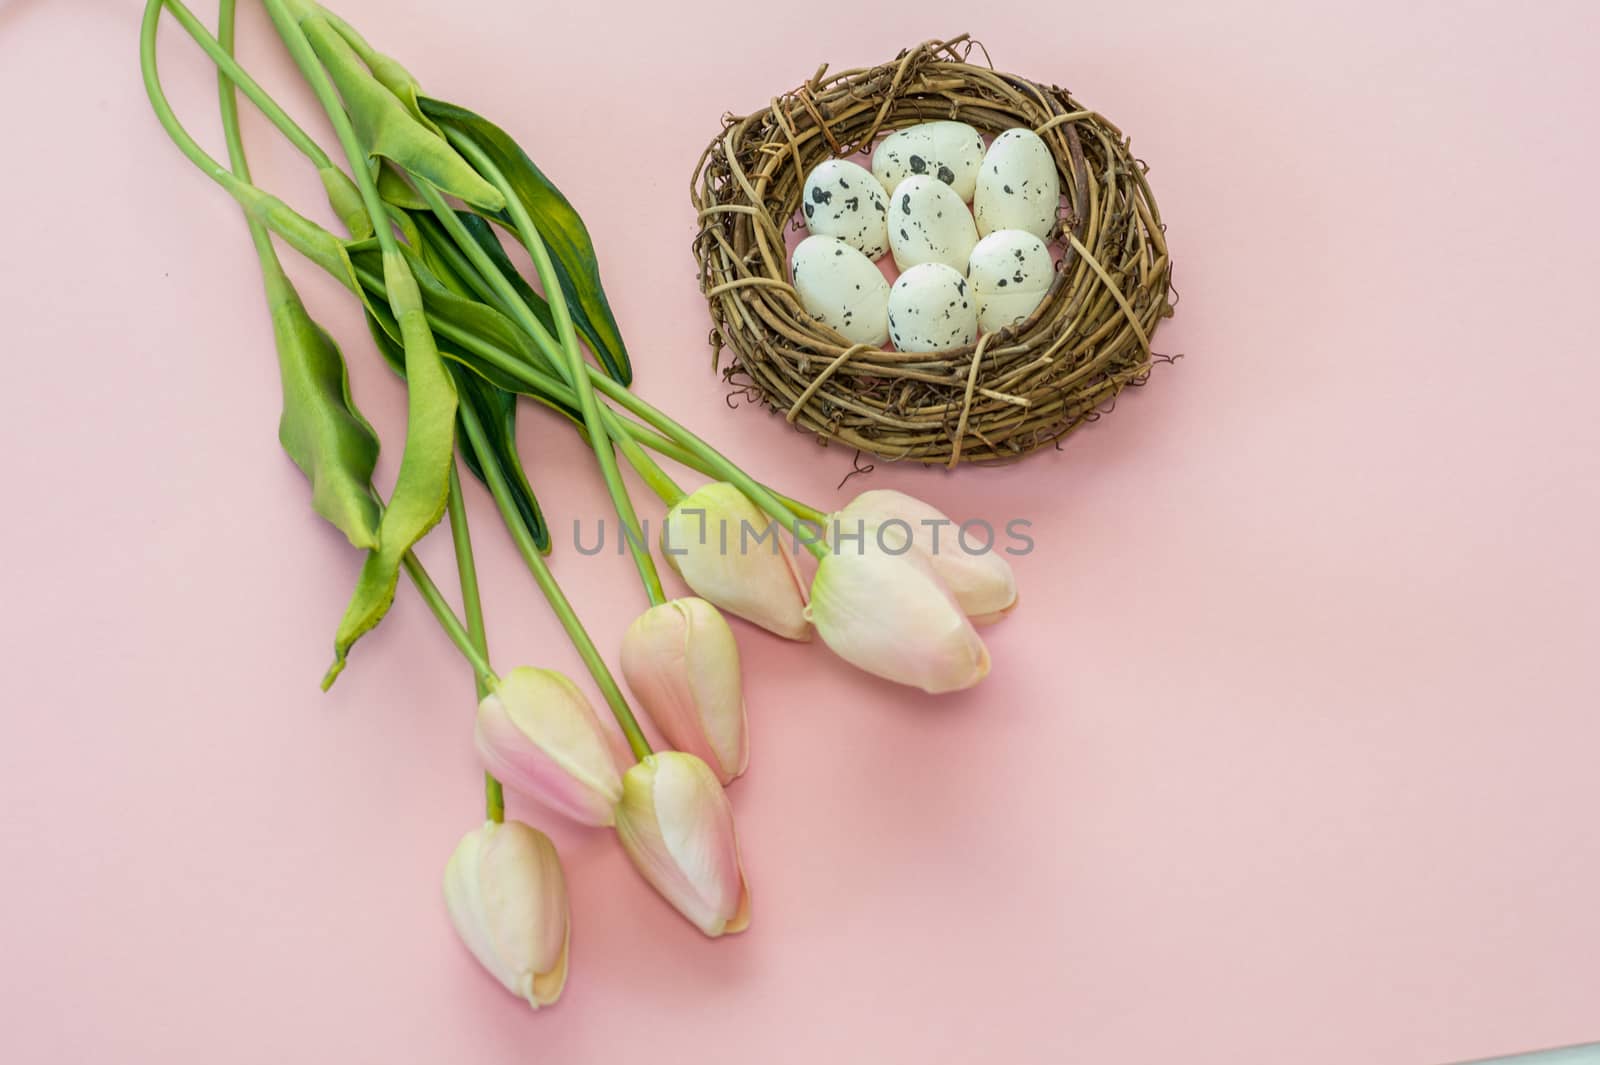 Easter eggs and tulips on wooden planks.